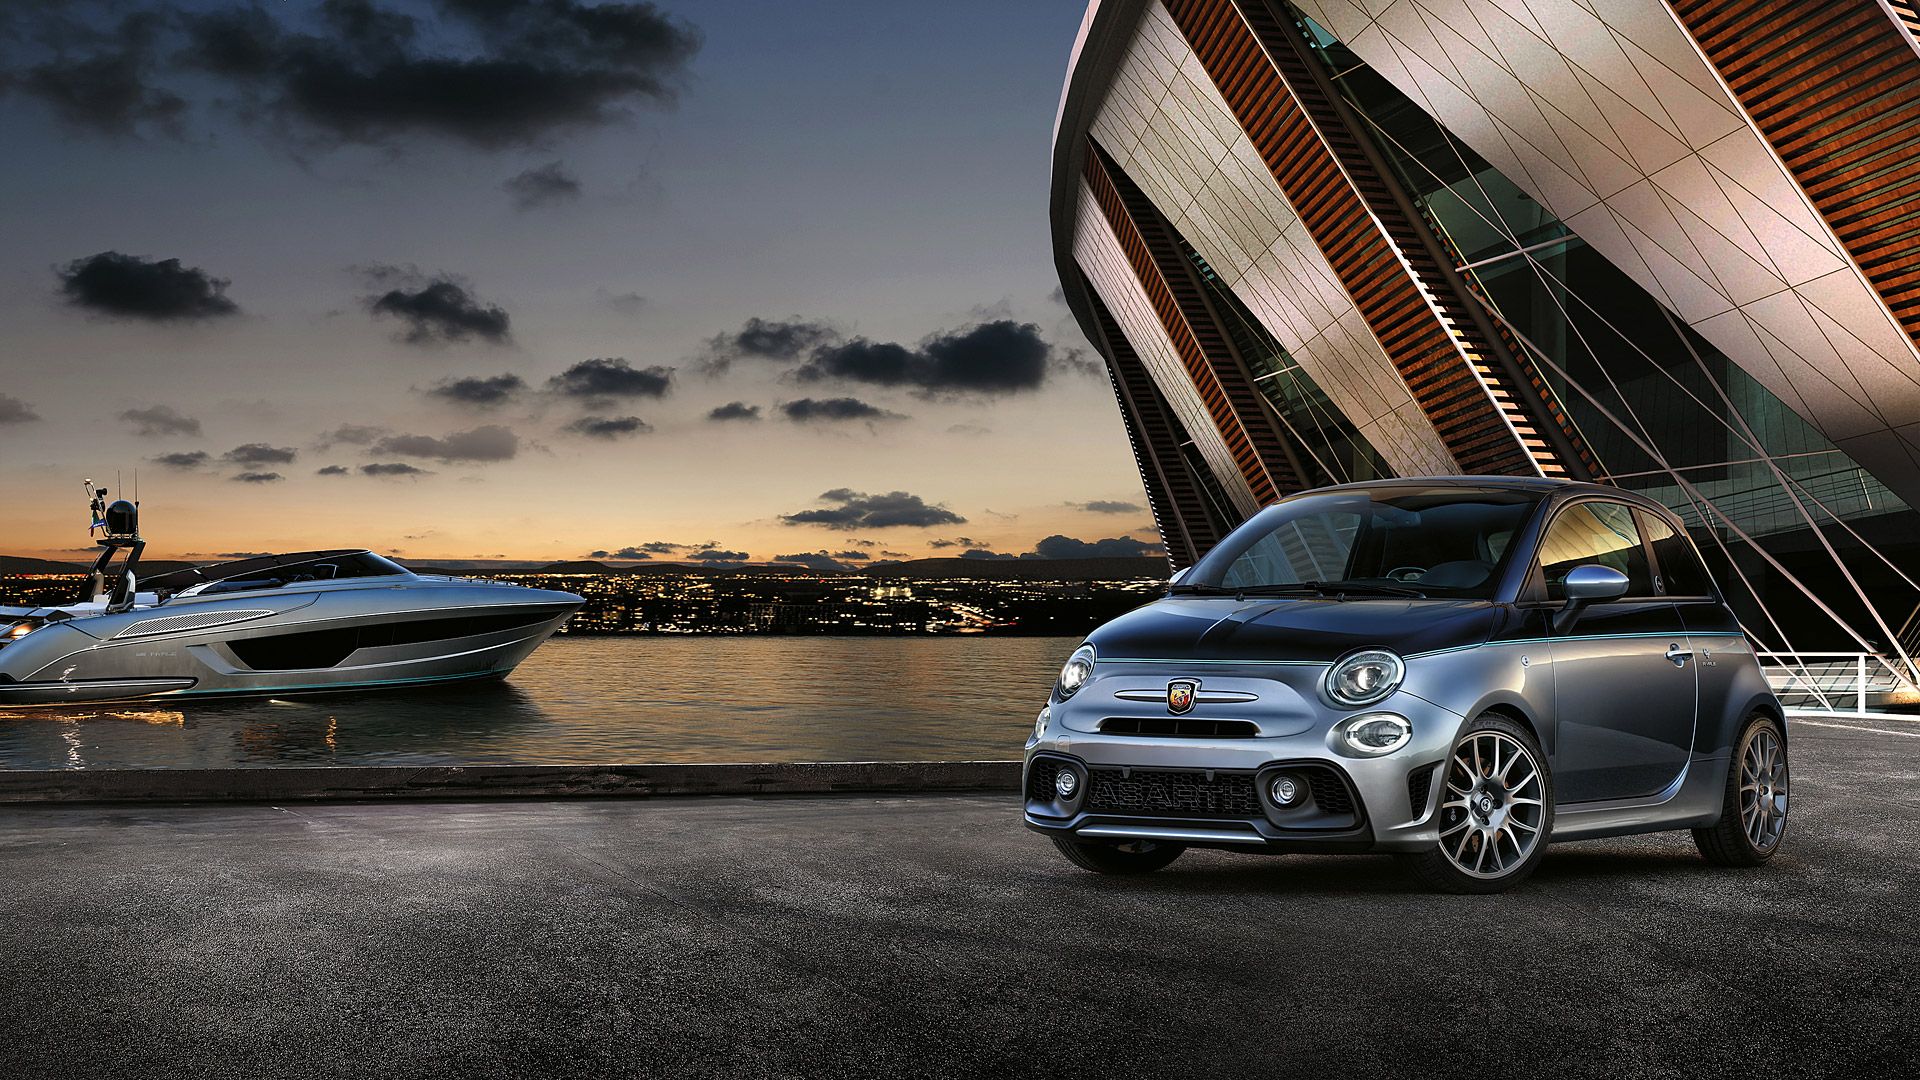 Fiat Abarth Wallpapers